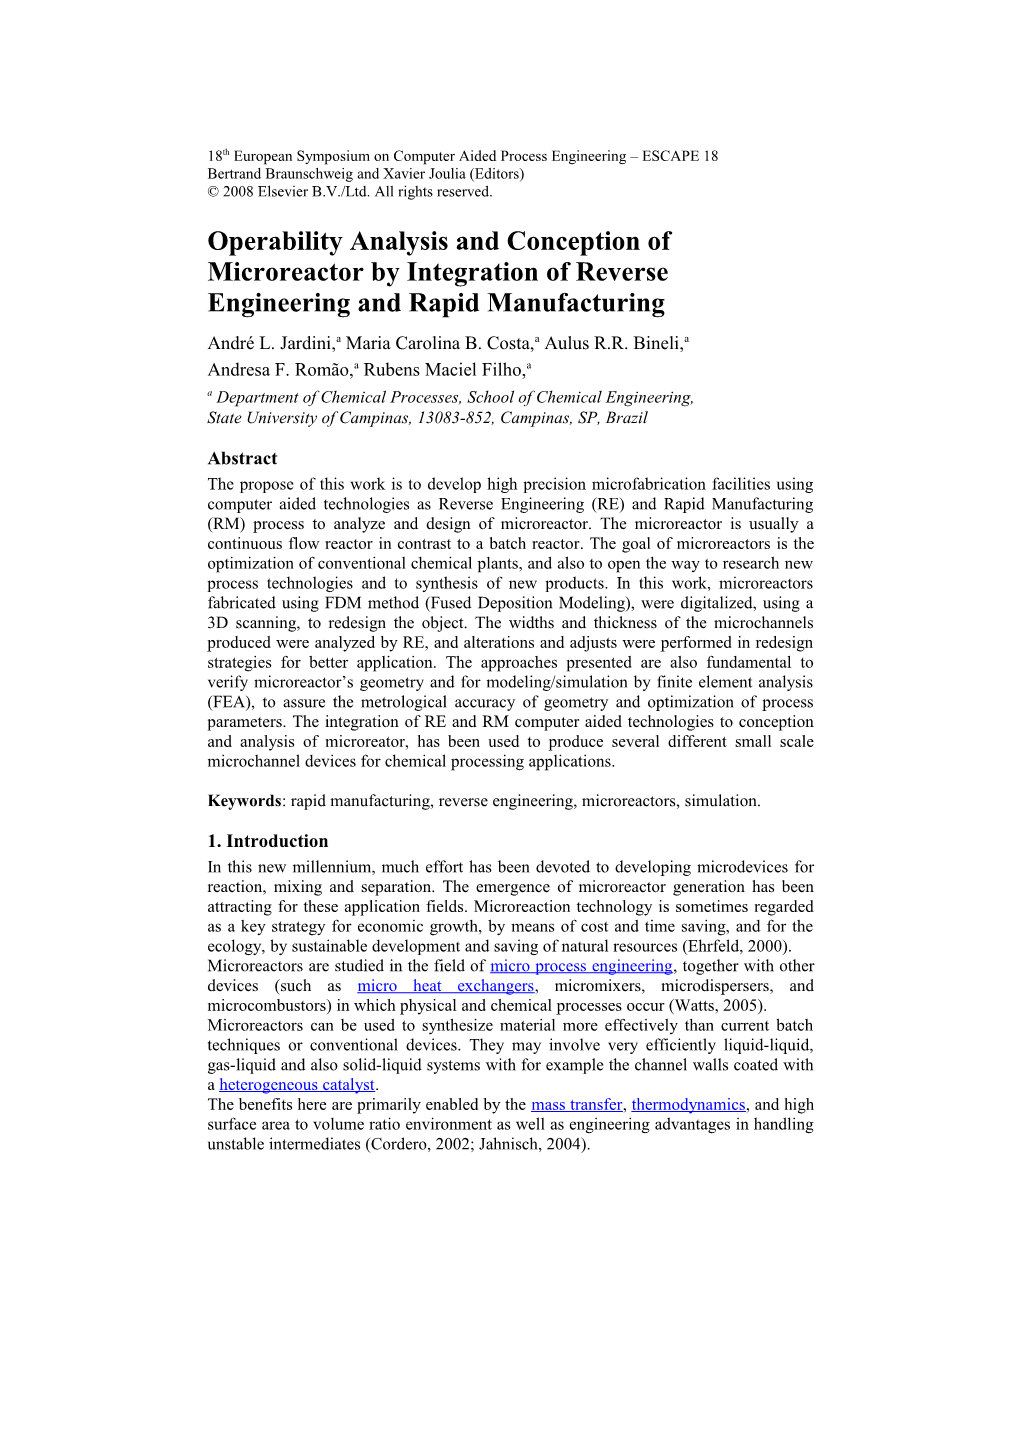 Operability Analysis and Conception of Microreactor by Integration of Reverse Engineering